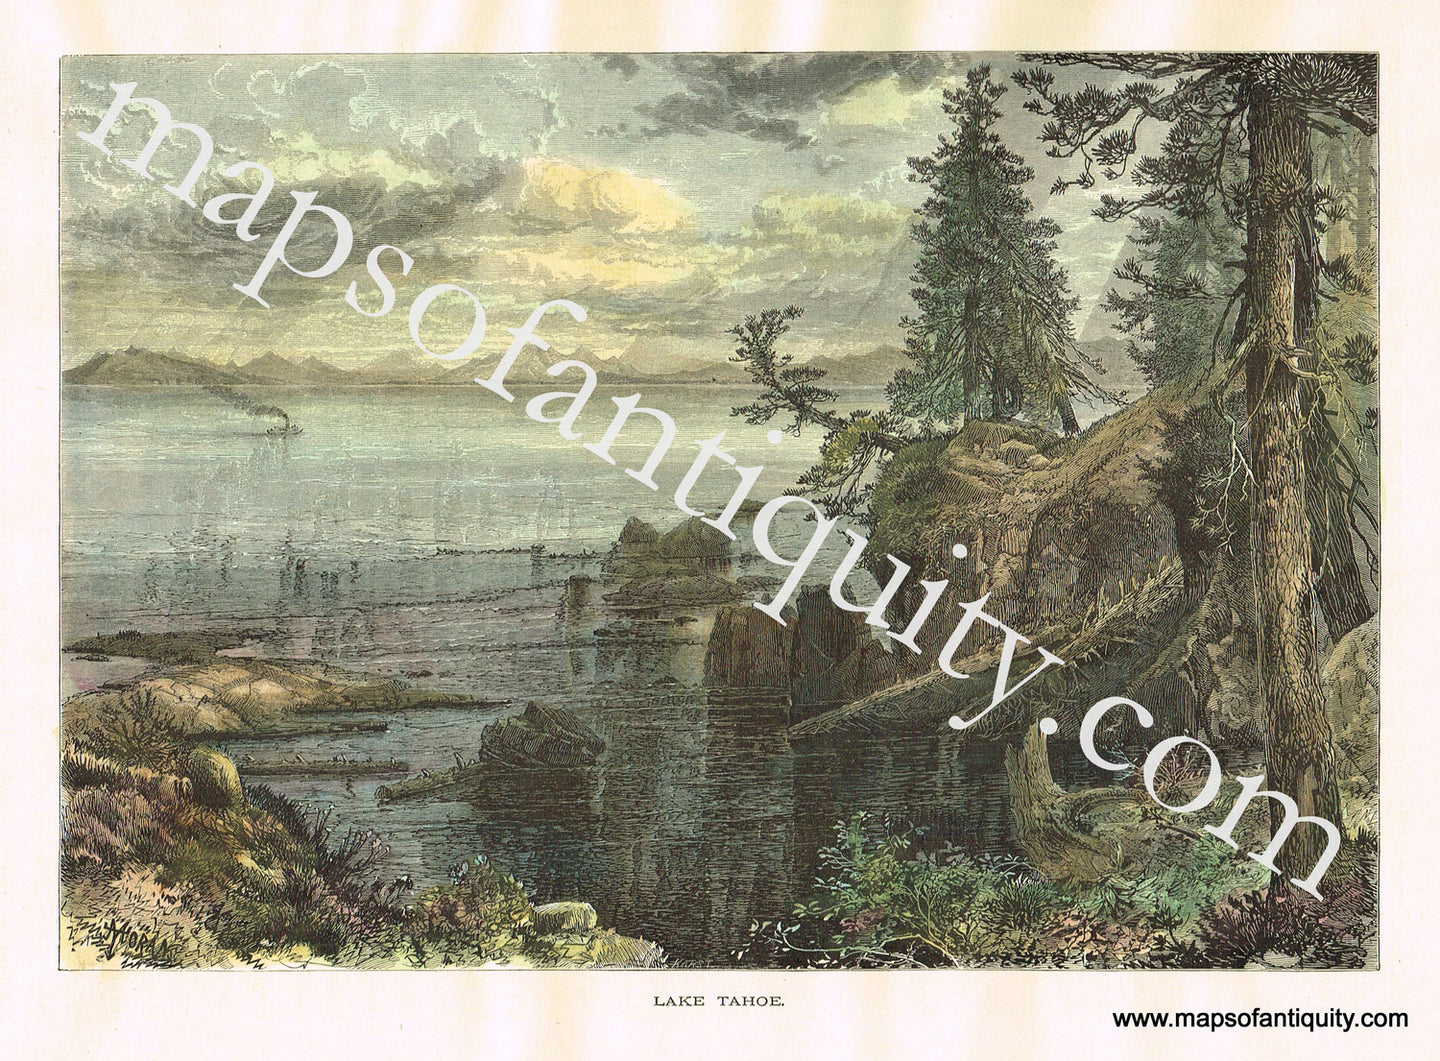 Antique-Hand-Colored-Engraved-Illustration-Lake-Tahoe-United-States-West-1872-Picturesque-America-Maps-Of-Antiquity